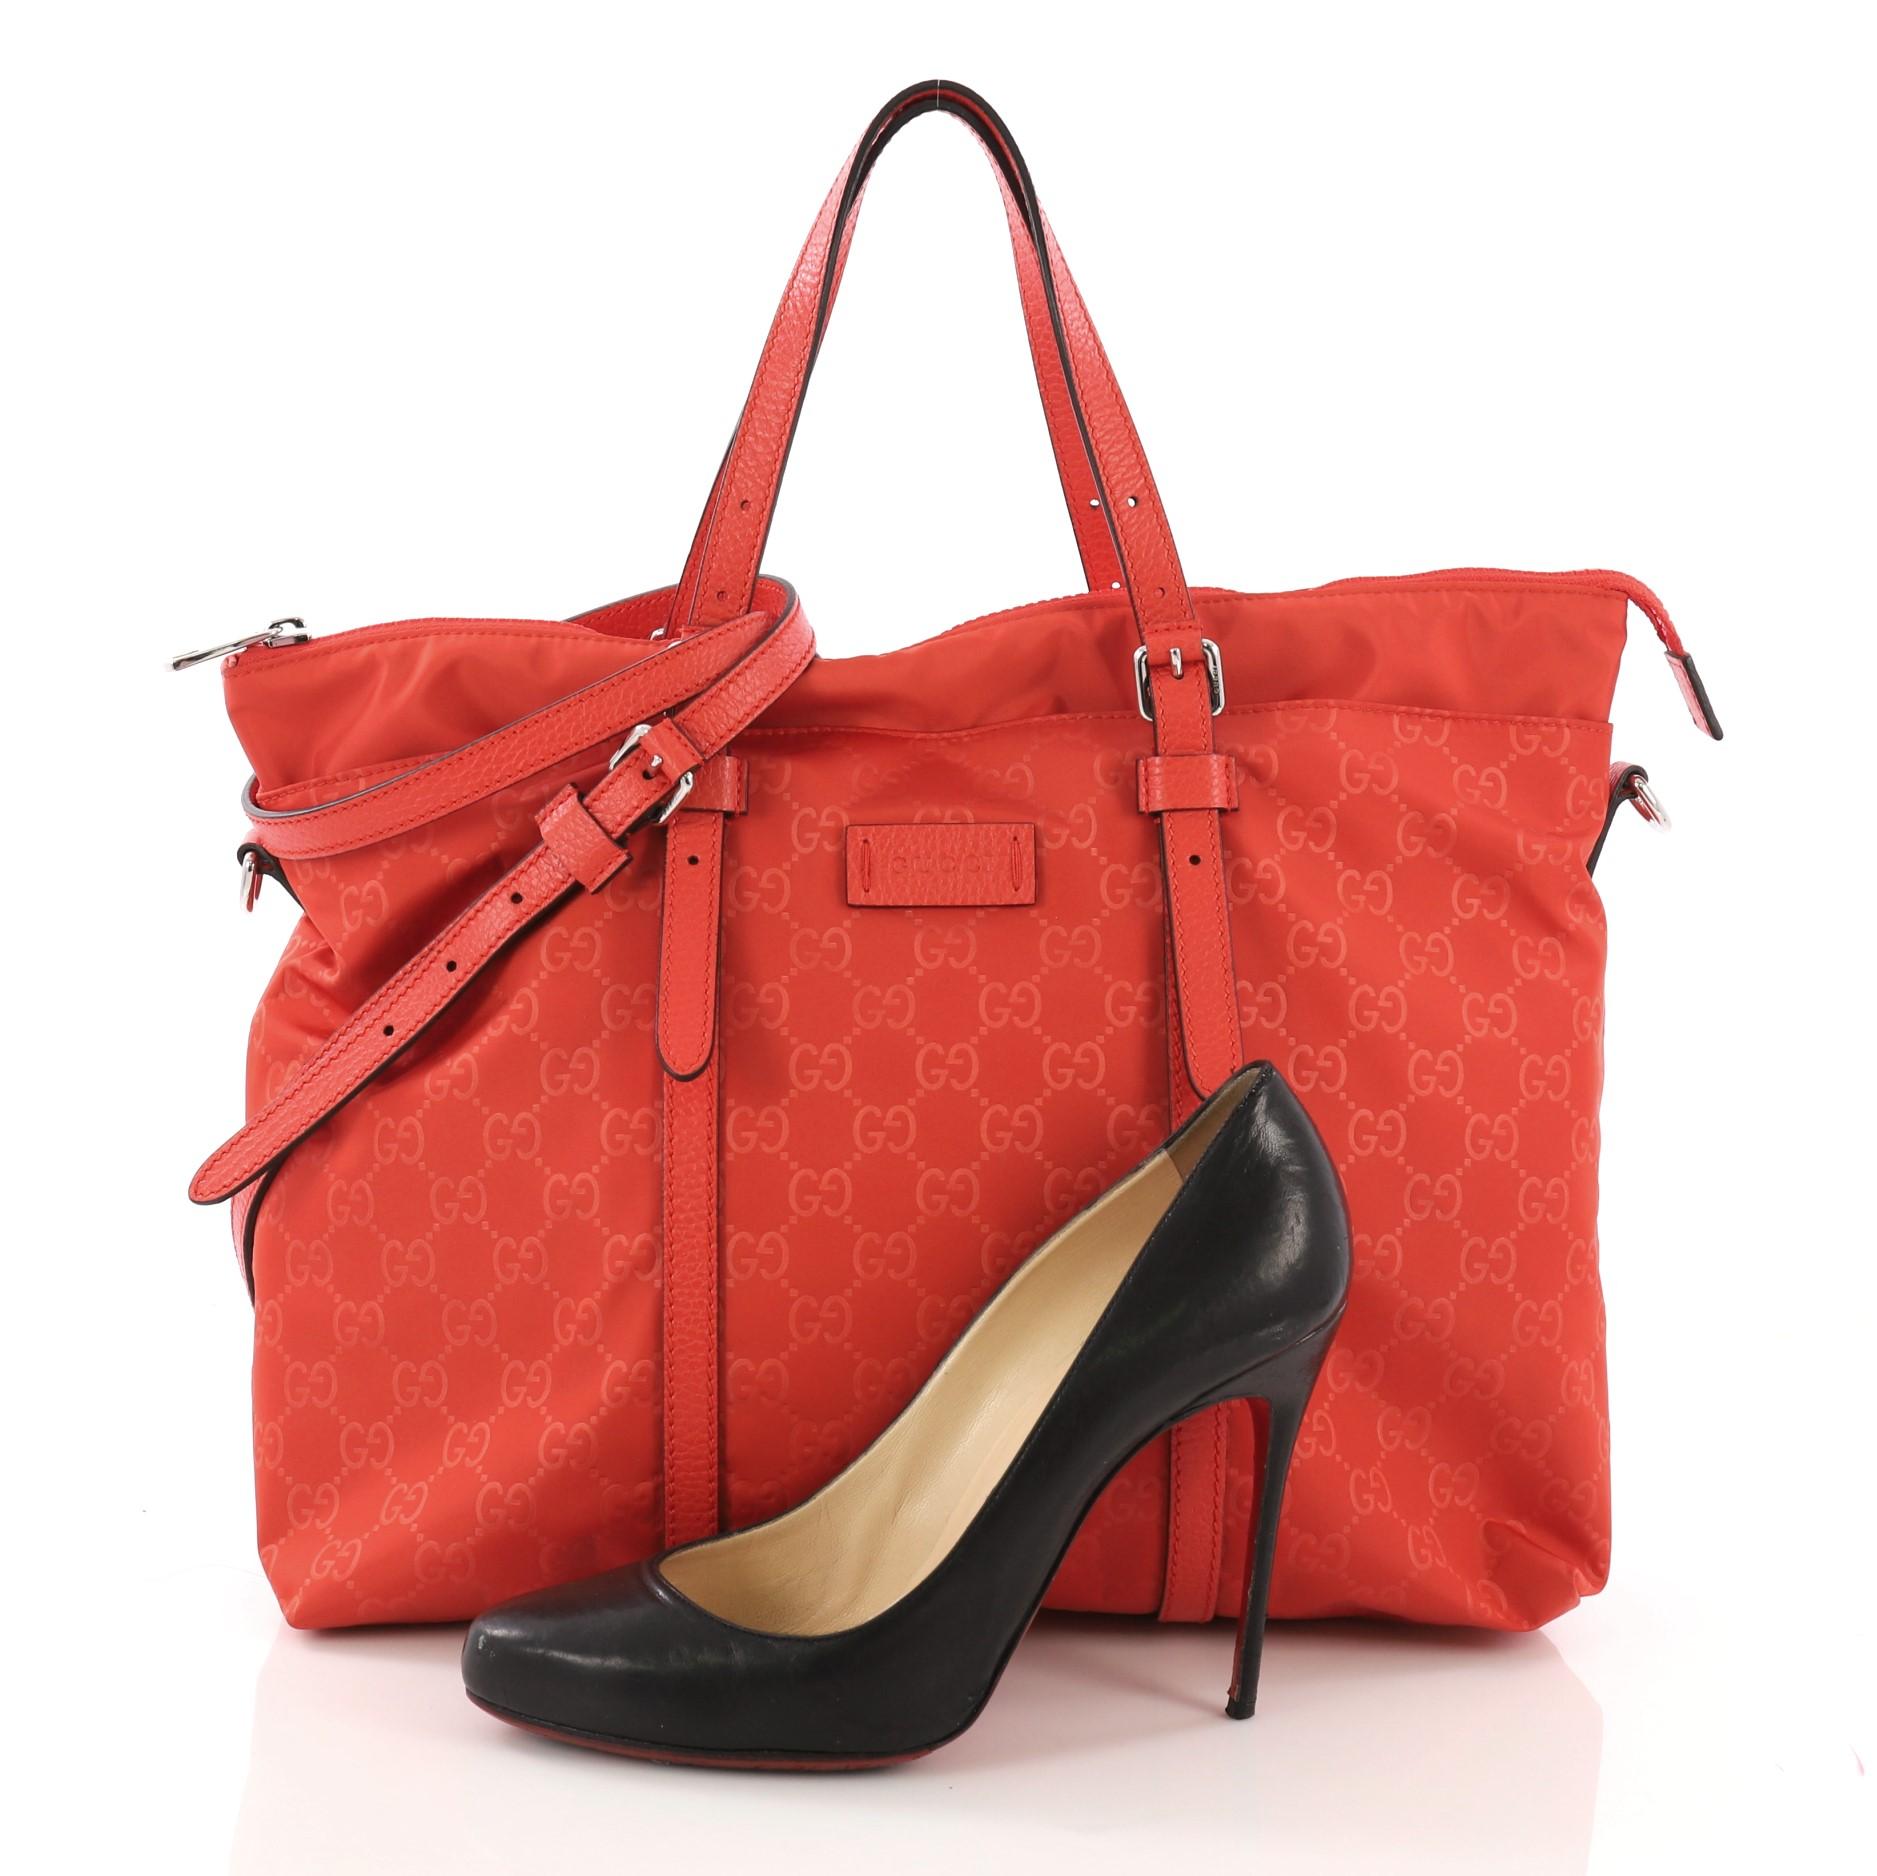 This Gucci Light Tote Guccissima Nylon Medium, crafted in red guccissima nylon, features dual slim handles and silver-tone hardware. Its zip closure opens to a red nylon interior with side zip and slip pockets. **Note: Shoe photographed is used as a